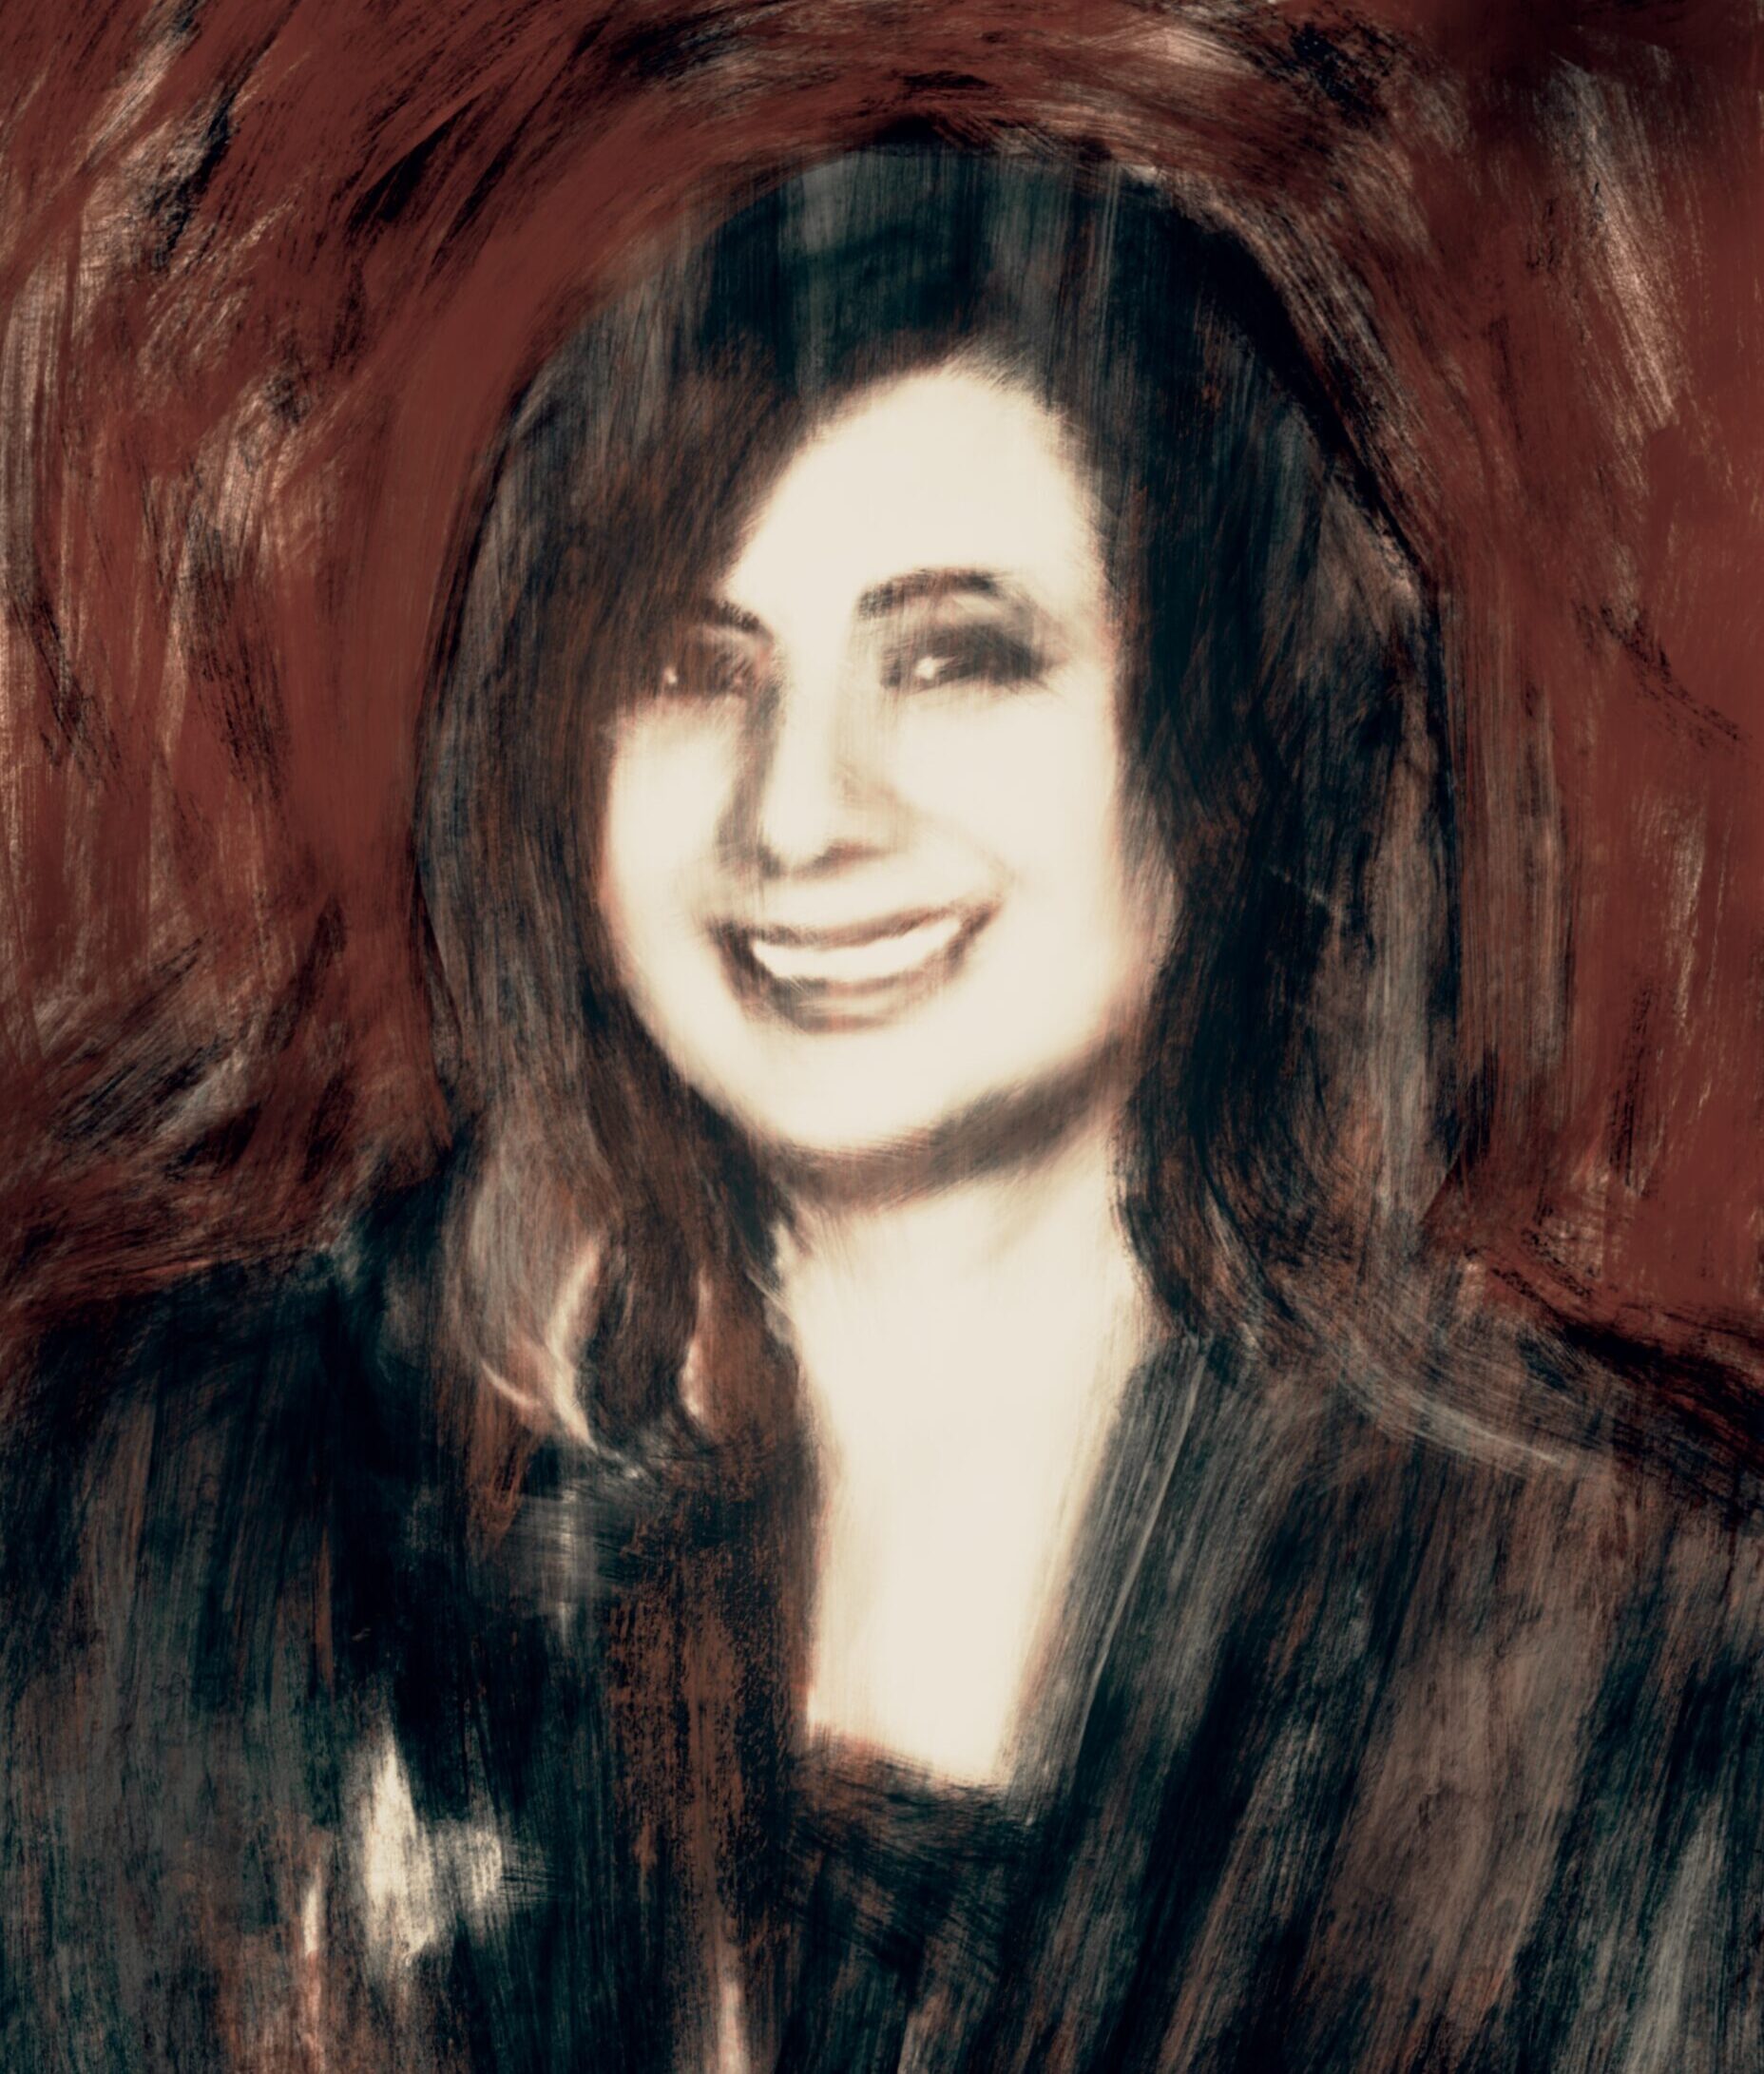 An illustration of Sopi Sullivan, a smiling white woman with brown hair, carefully groomed eyebrows and crescent shaped smiling eyes.